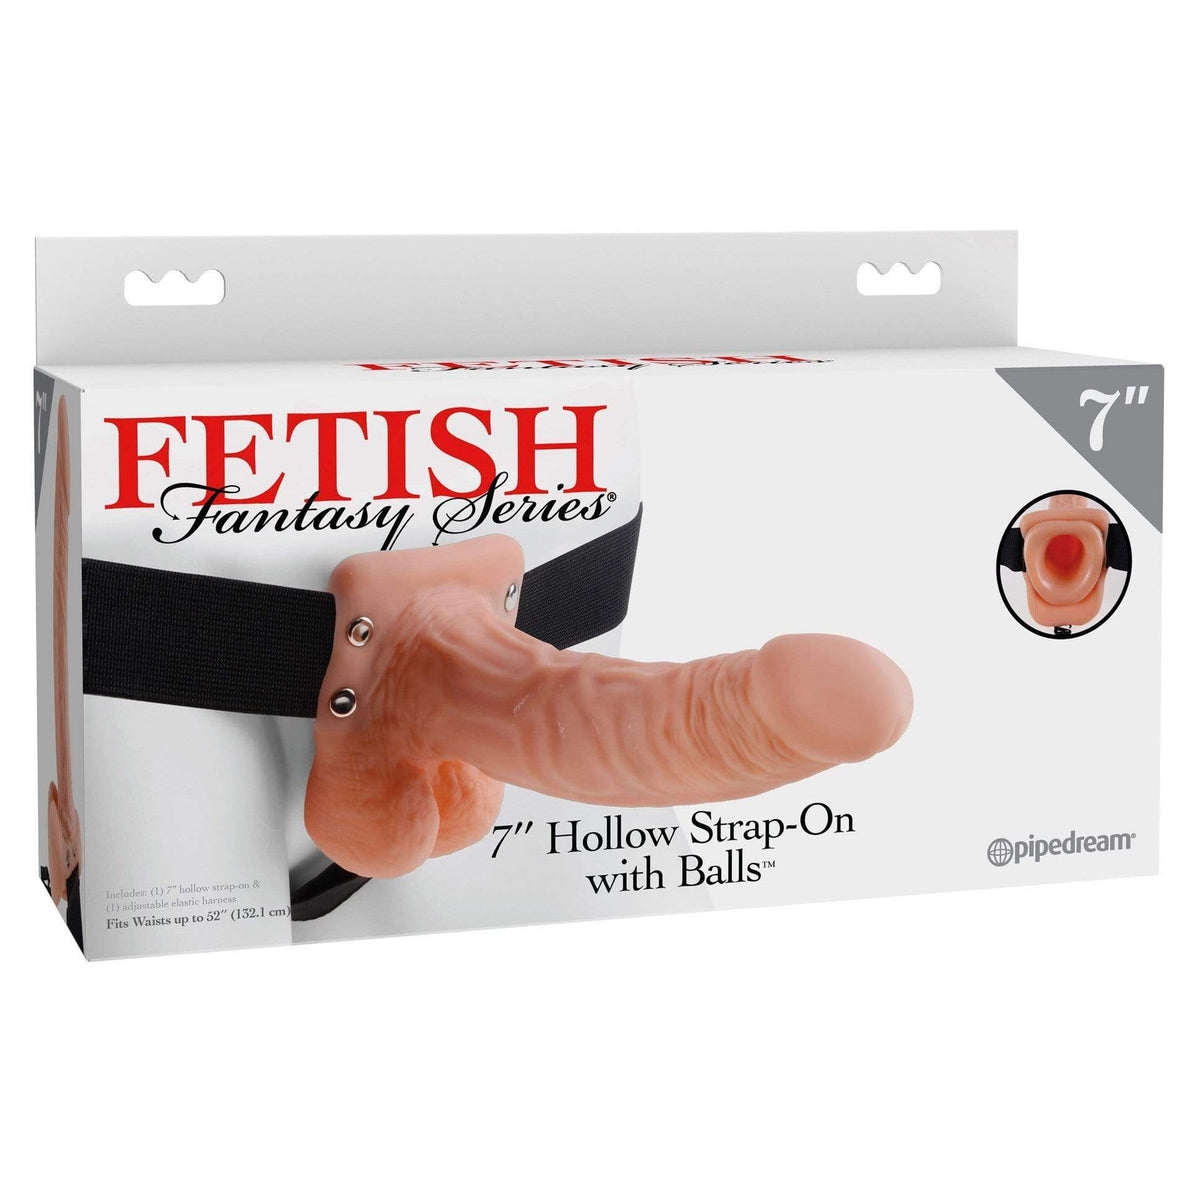 Pipedream - Fetish Fantasy Series Hollow Strap On with Balls 7&quot; (Beige) Strap On with Hollow Dildo for Male (Non Vibration) 603912362749 CherryAffairs